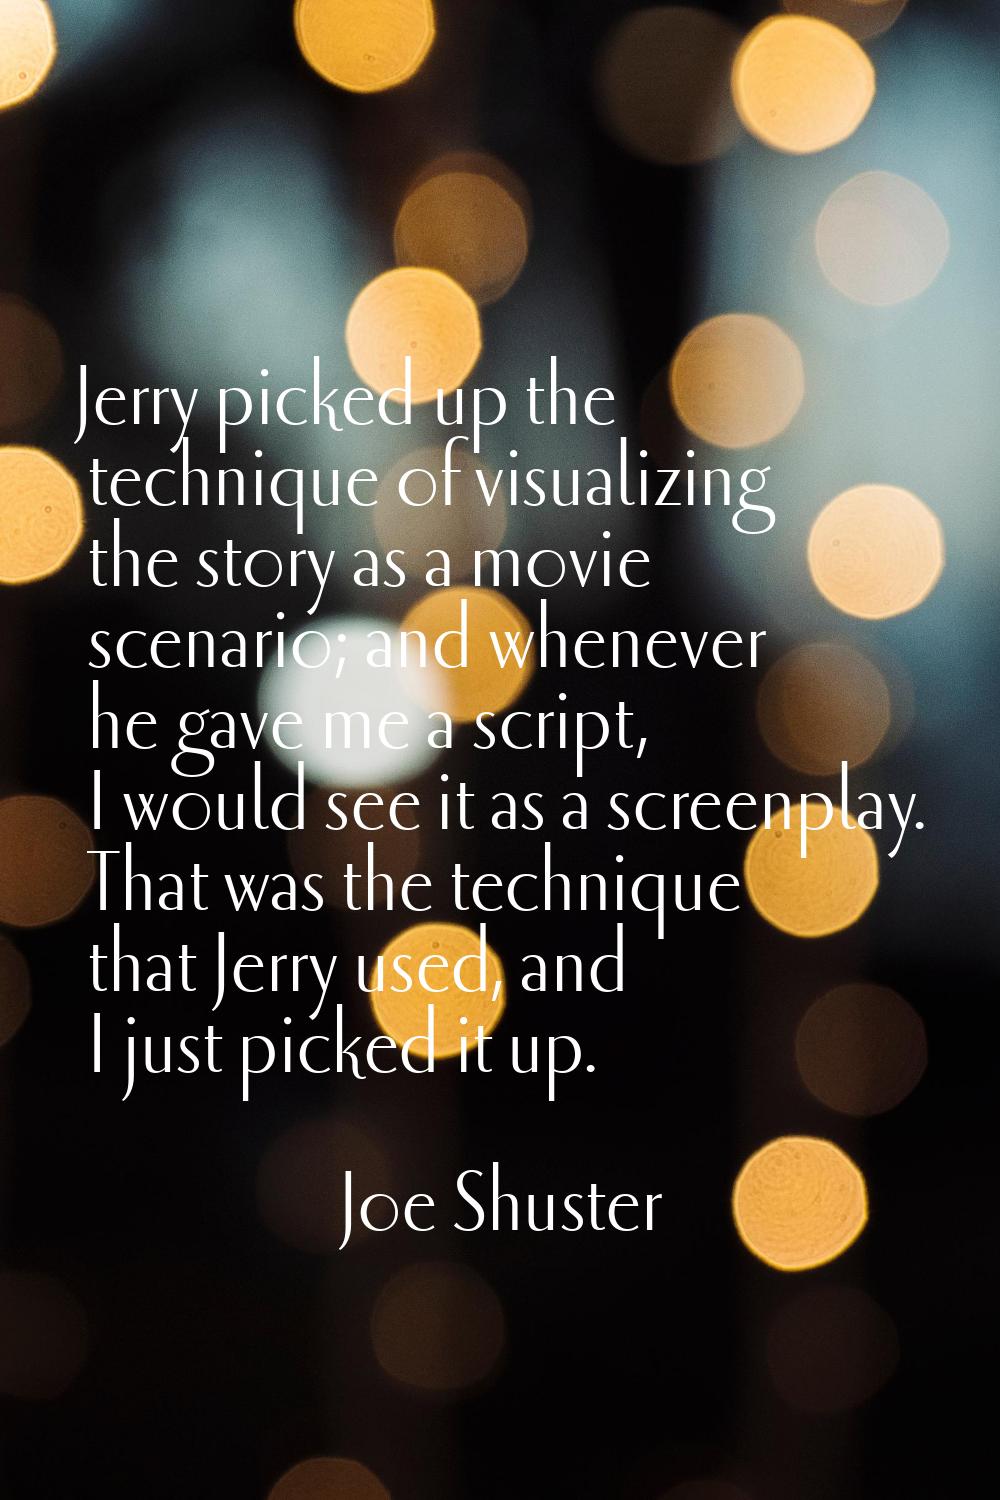 Jerry picked up the technique of visualizing the story as a movie scenario; and whenever he gave me